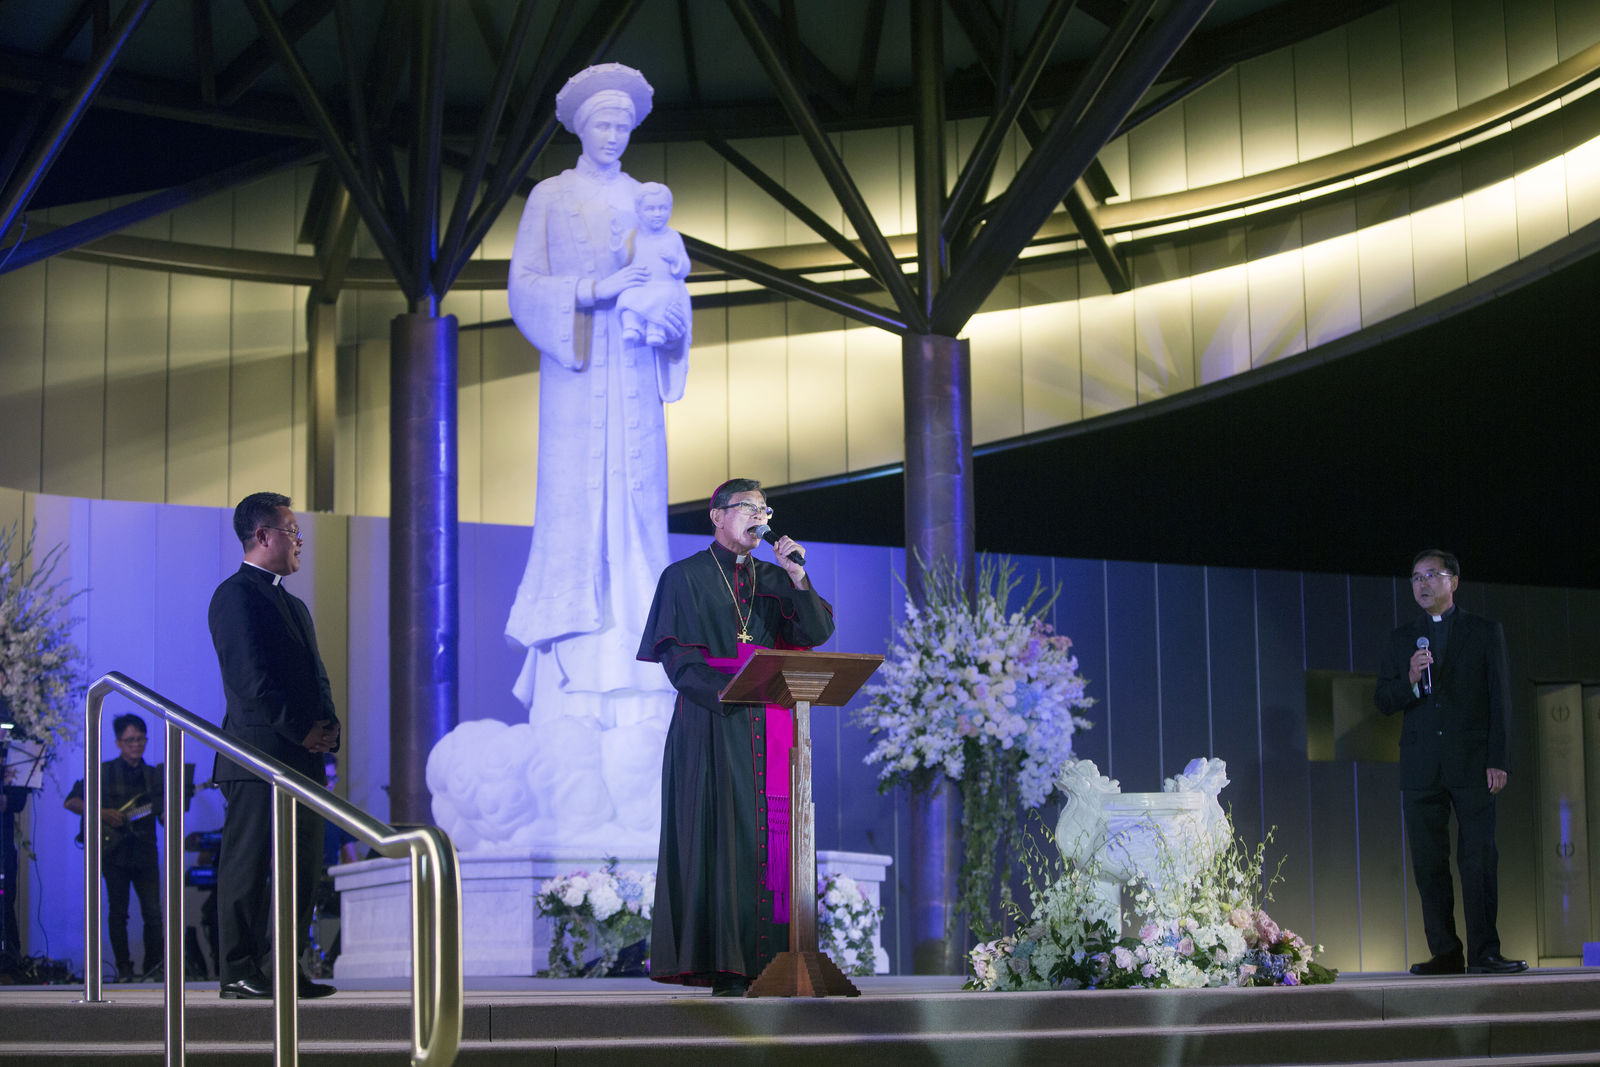 Bishop Thanh Thai Nguyen addresses the audience during the evening of the Solemn Blessing of the Our Lady of La Vang Shrine ceremony. Photo courtesy Diocese of Orange.